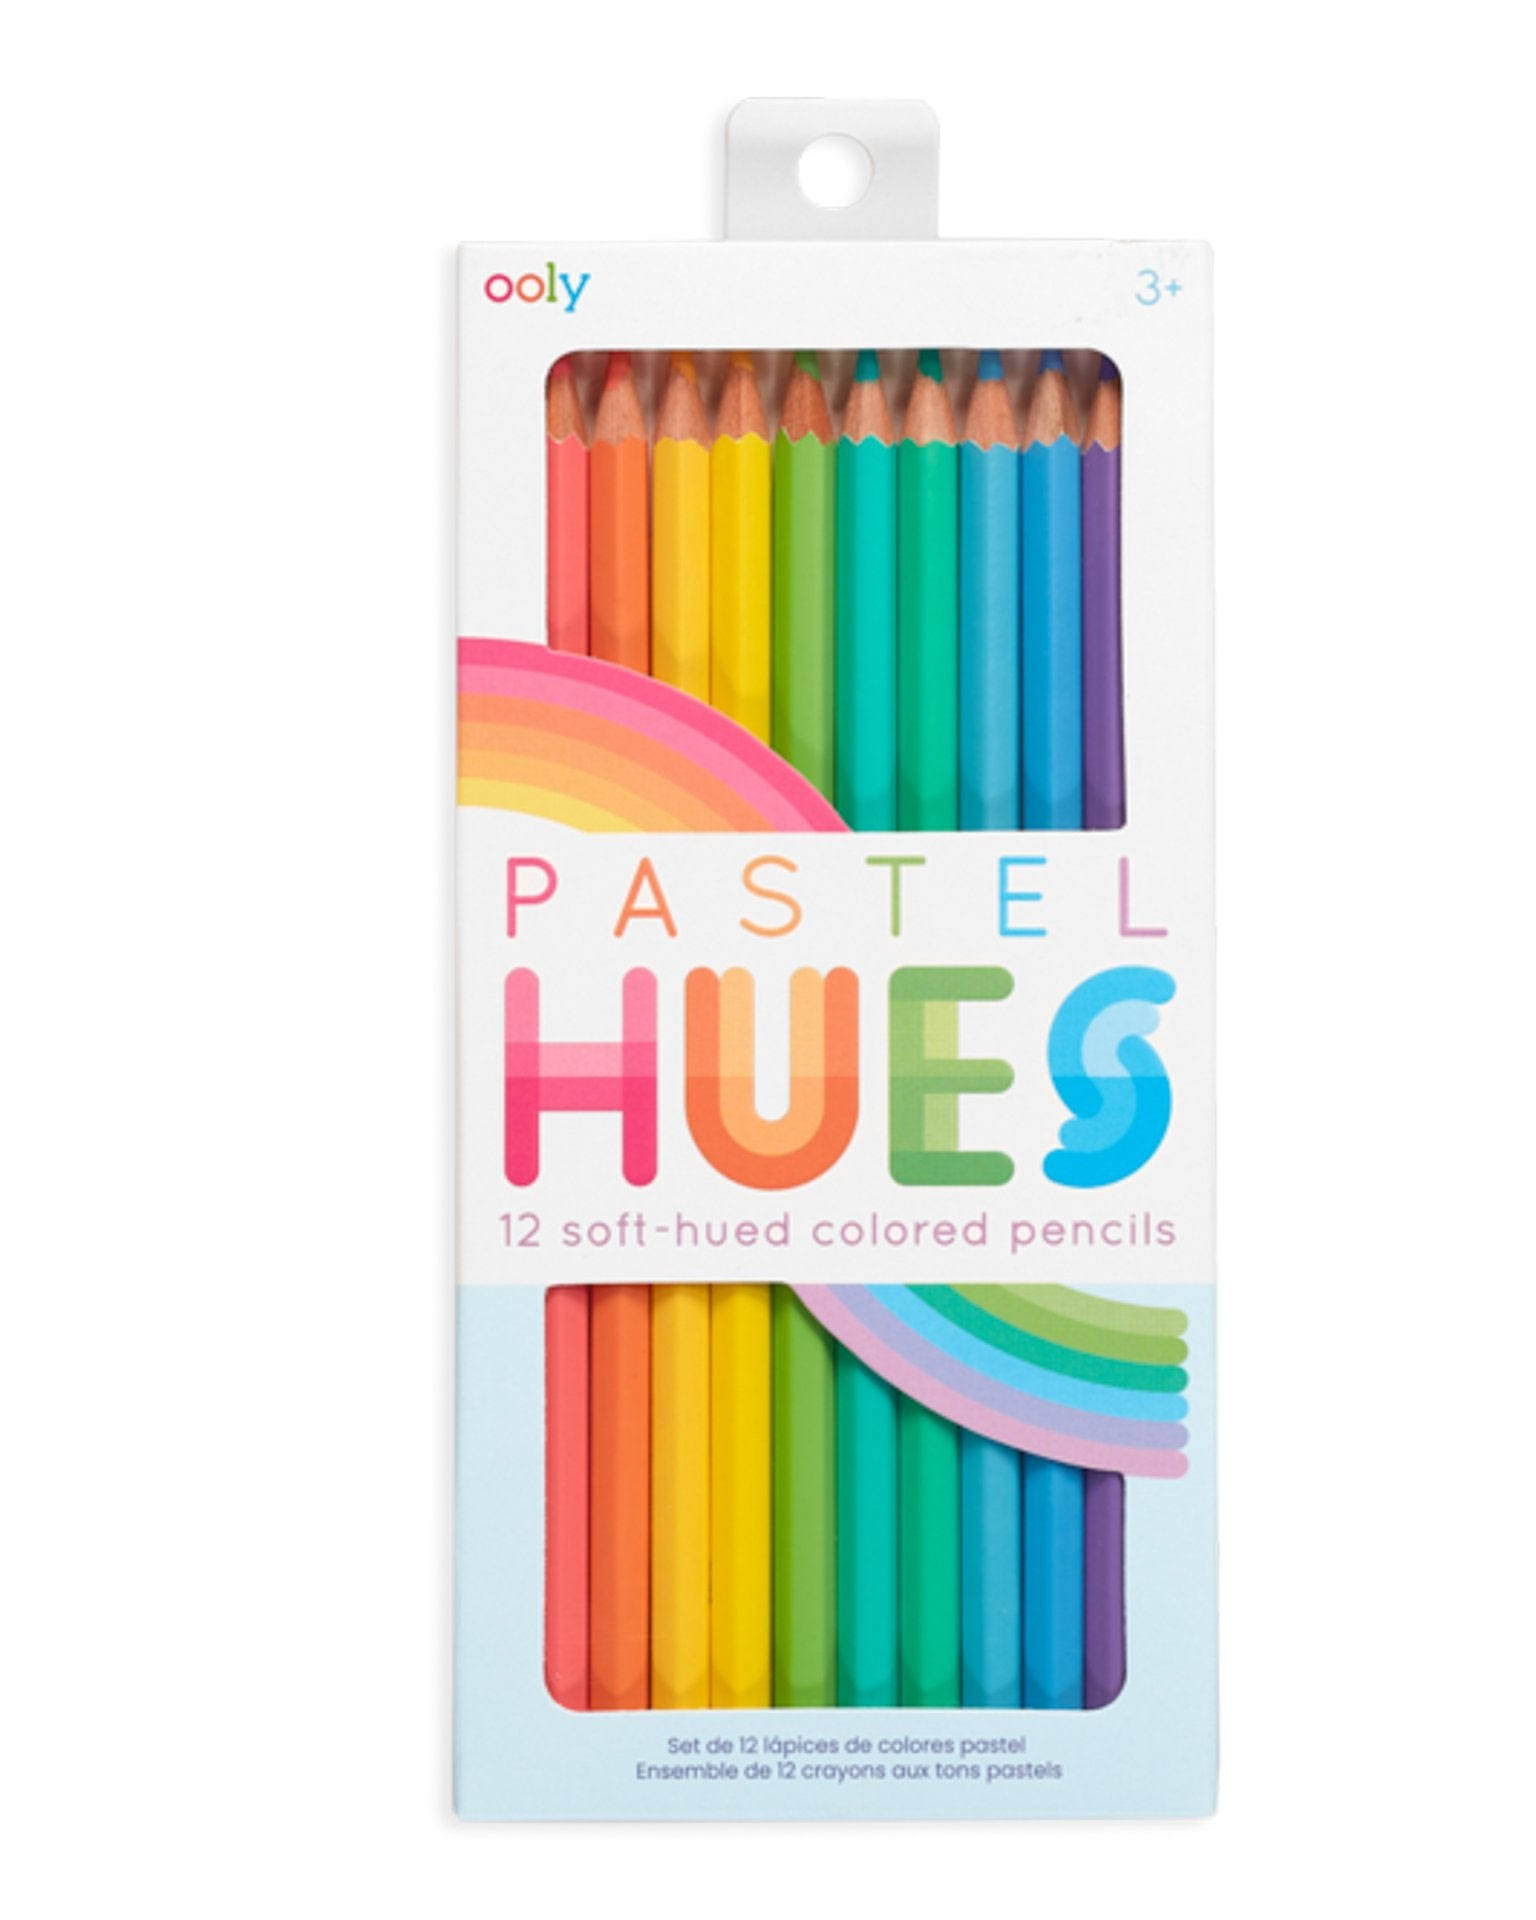 Ooly Pastel Hues Colored Pencils - Set of 12 One-Size